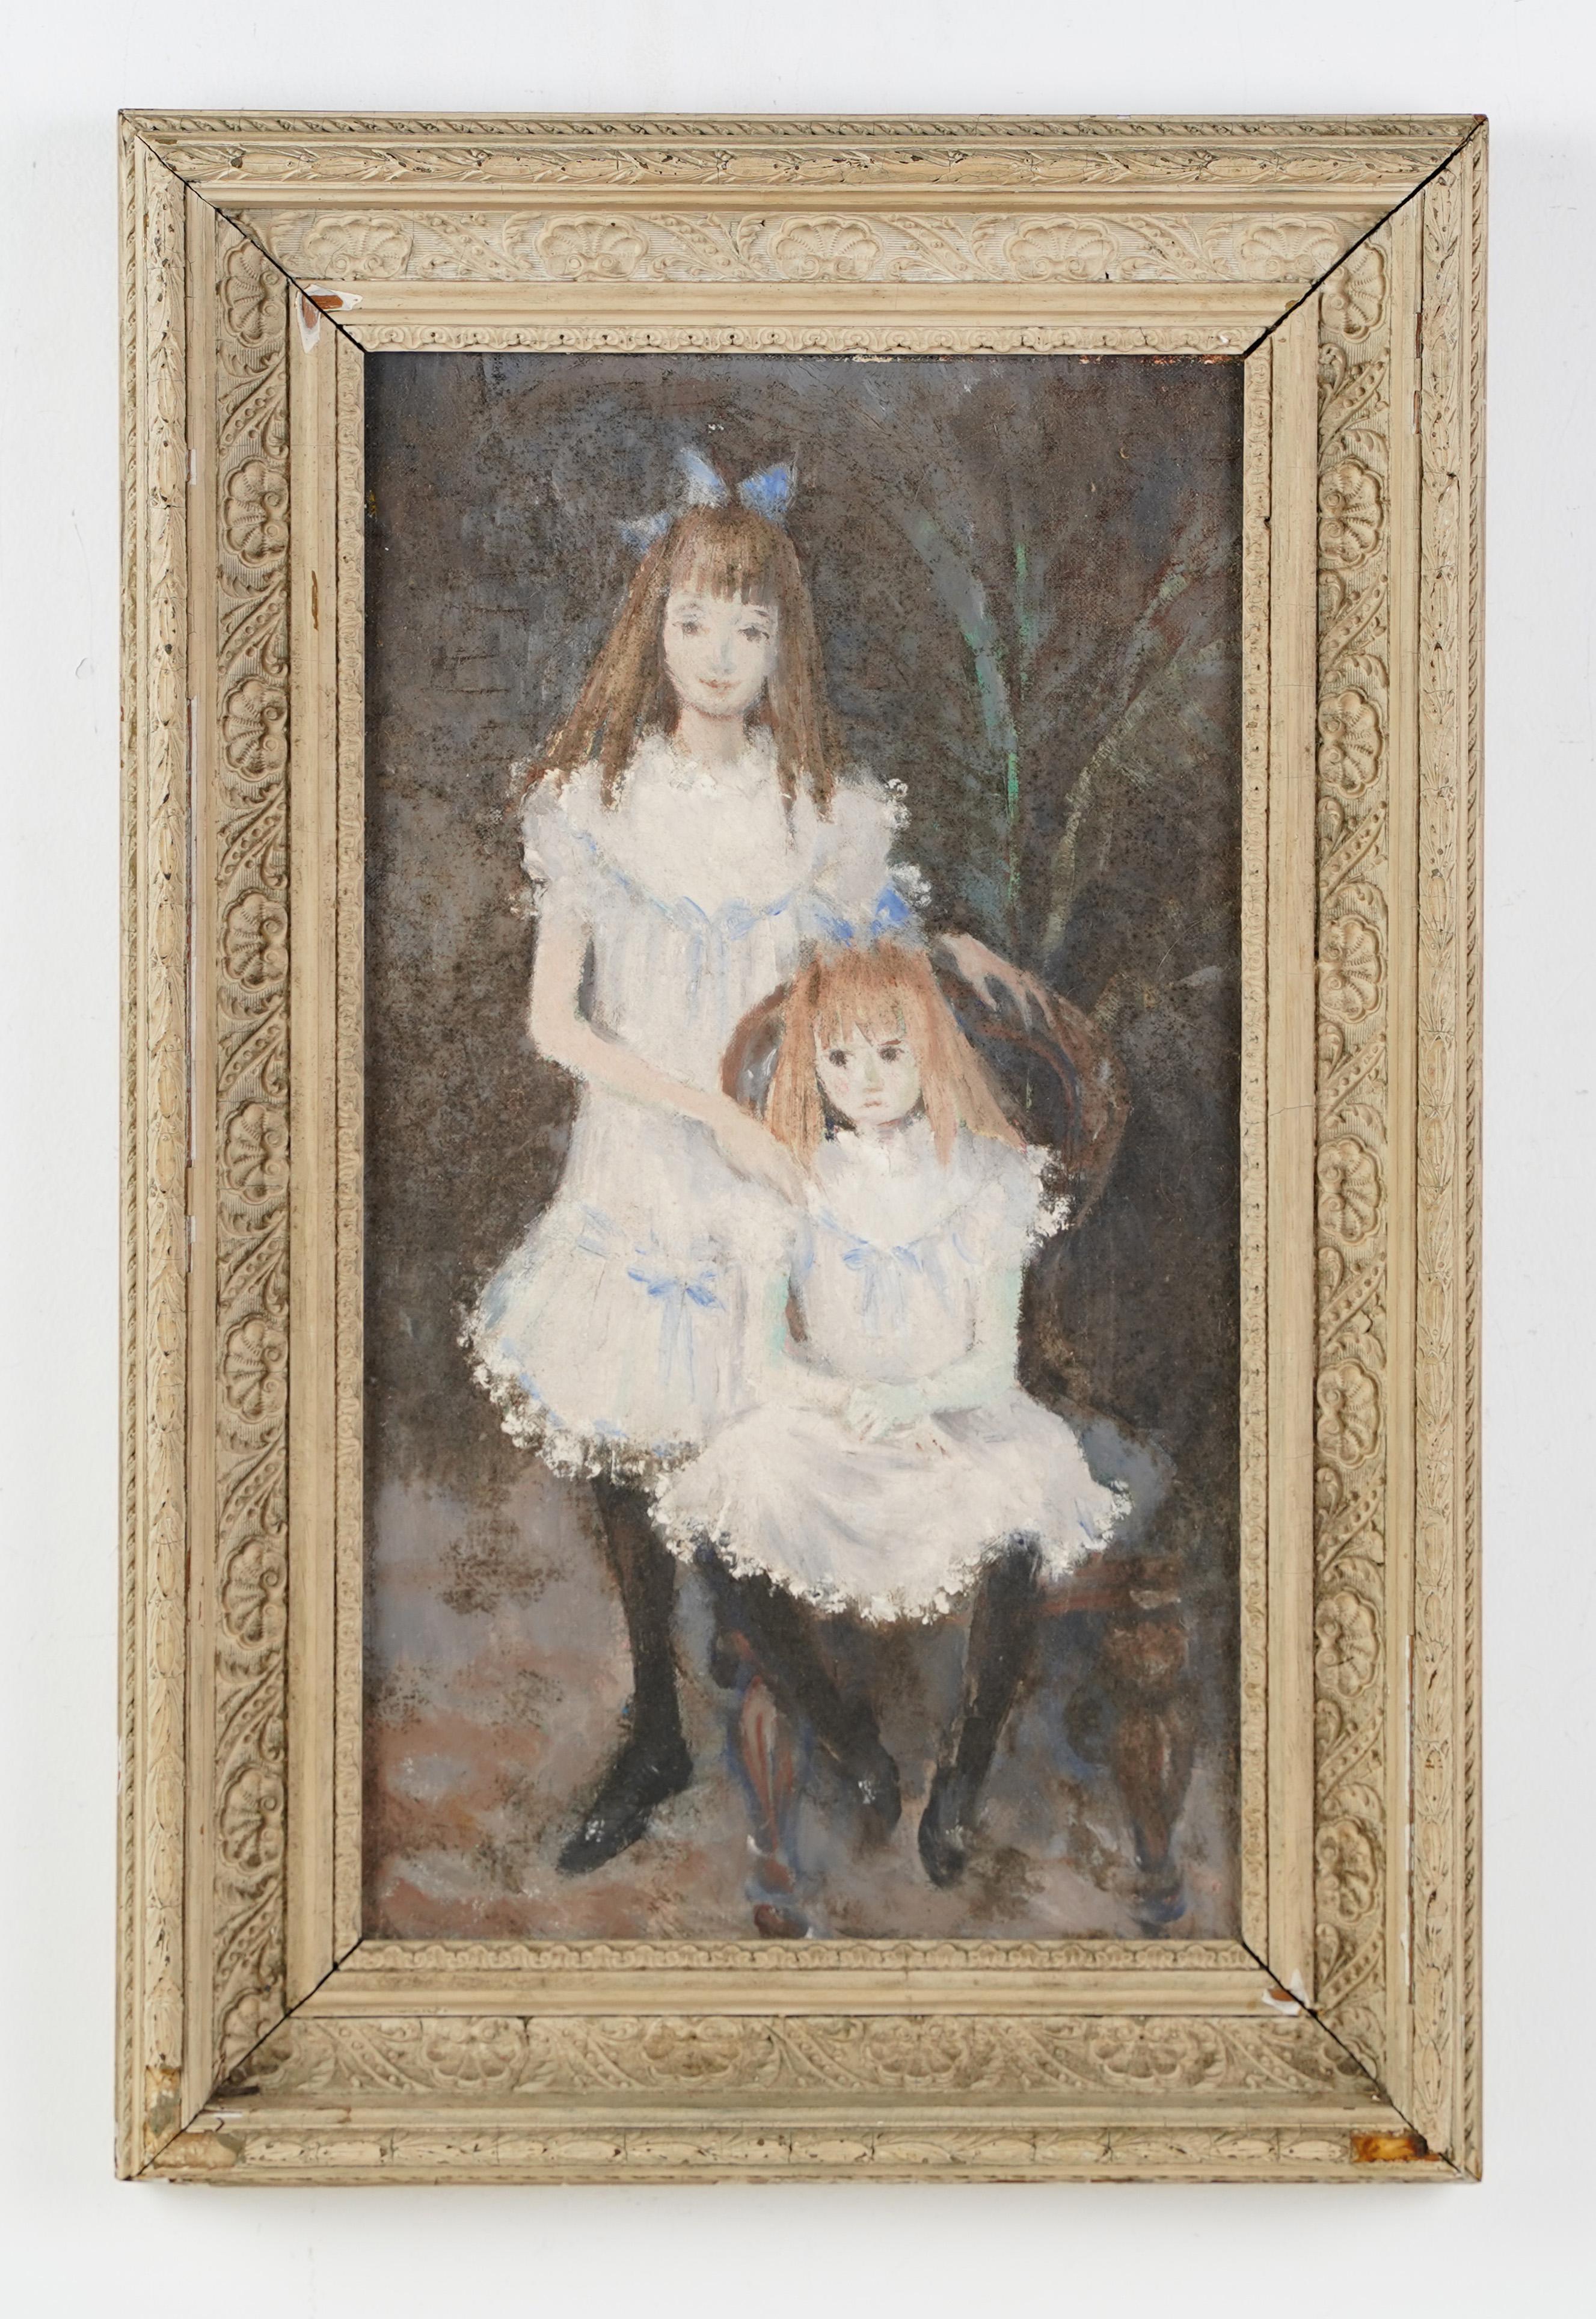 Antique French impressionist portrait oil painting of two young girls.  Oil on board.  No signature found.  Framed.  Image size, 10L x 18H.